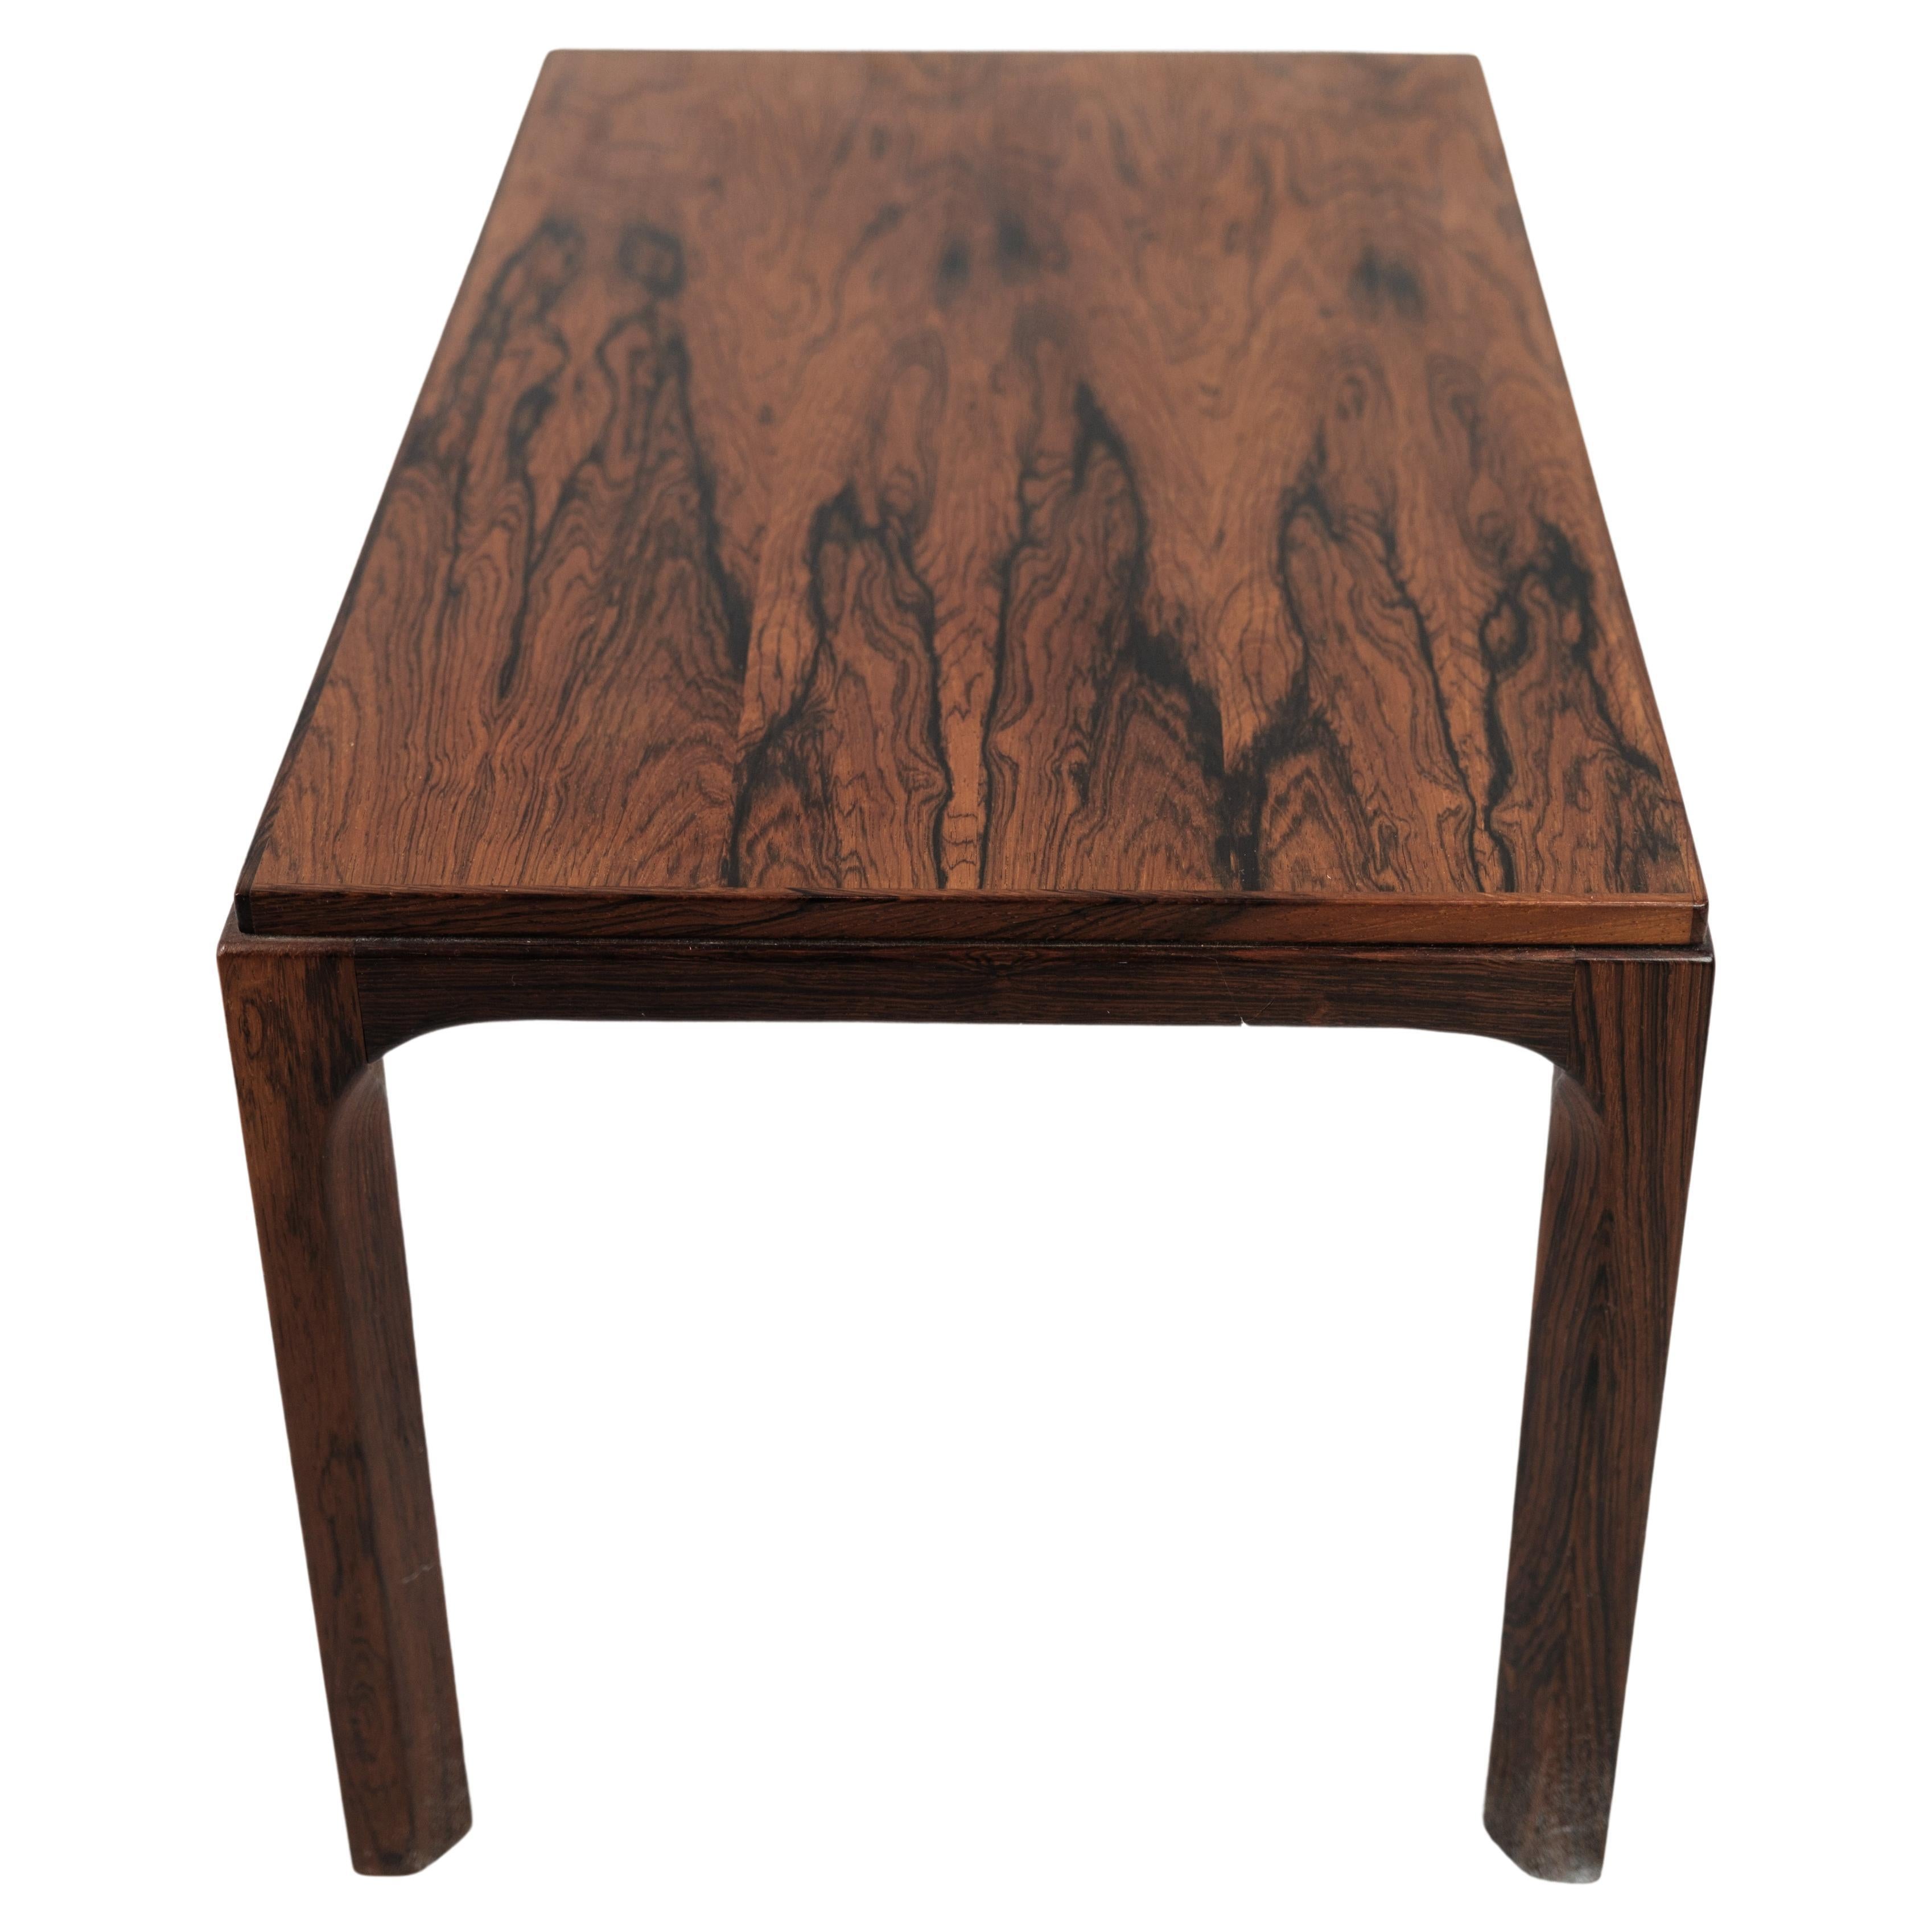 Rosewood Coffee Table of Danish Design from the 1960s